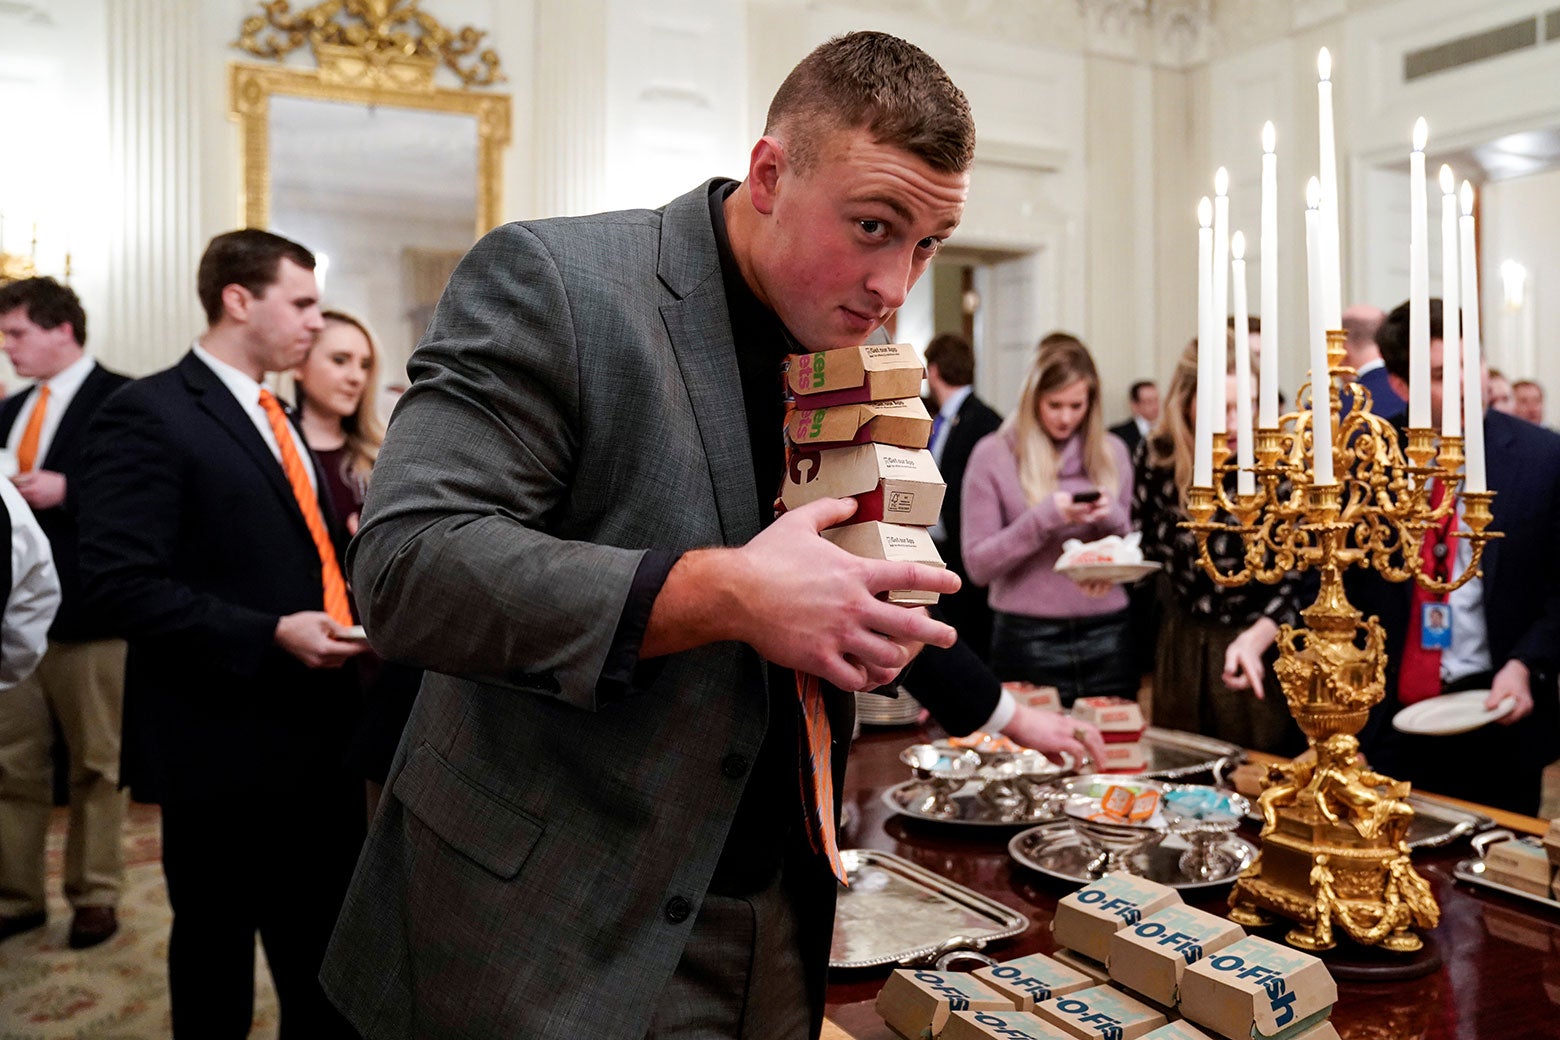 A Clemson player carries fast-food hamburgers provided by President Trump due to the partial government shutdown on Monday. It's a stack of several seemingly burger-size take-out boxes from McDonald's, and they're tucked under his chin and cradled in his hands.